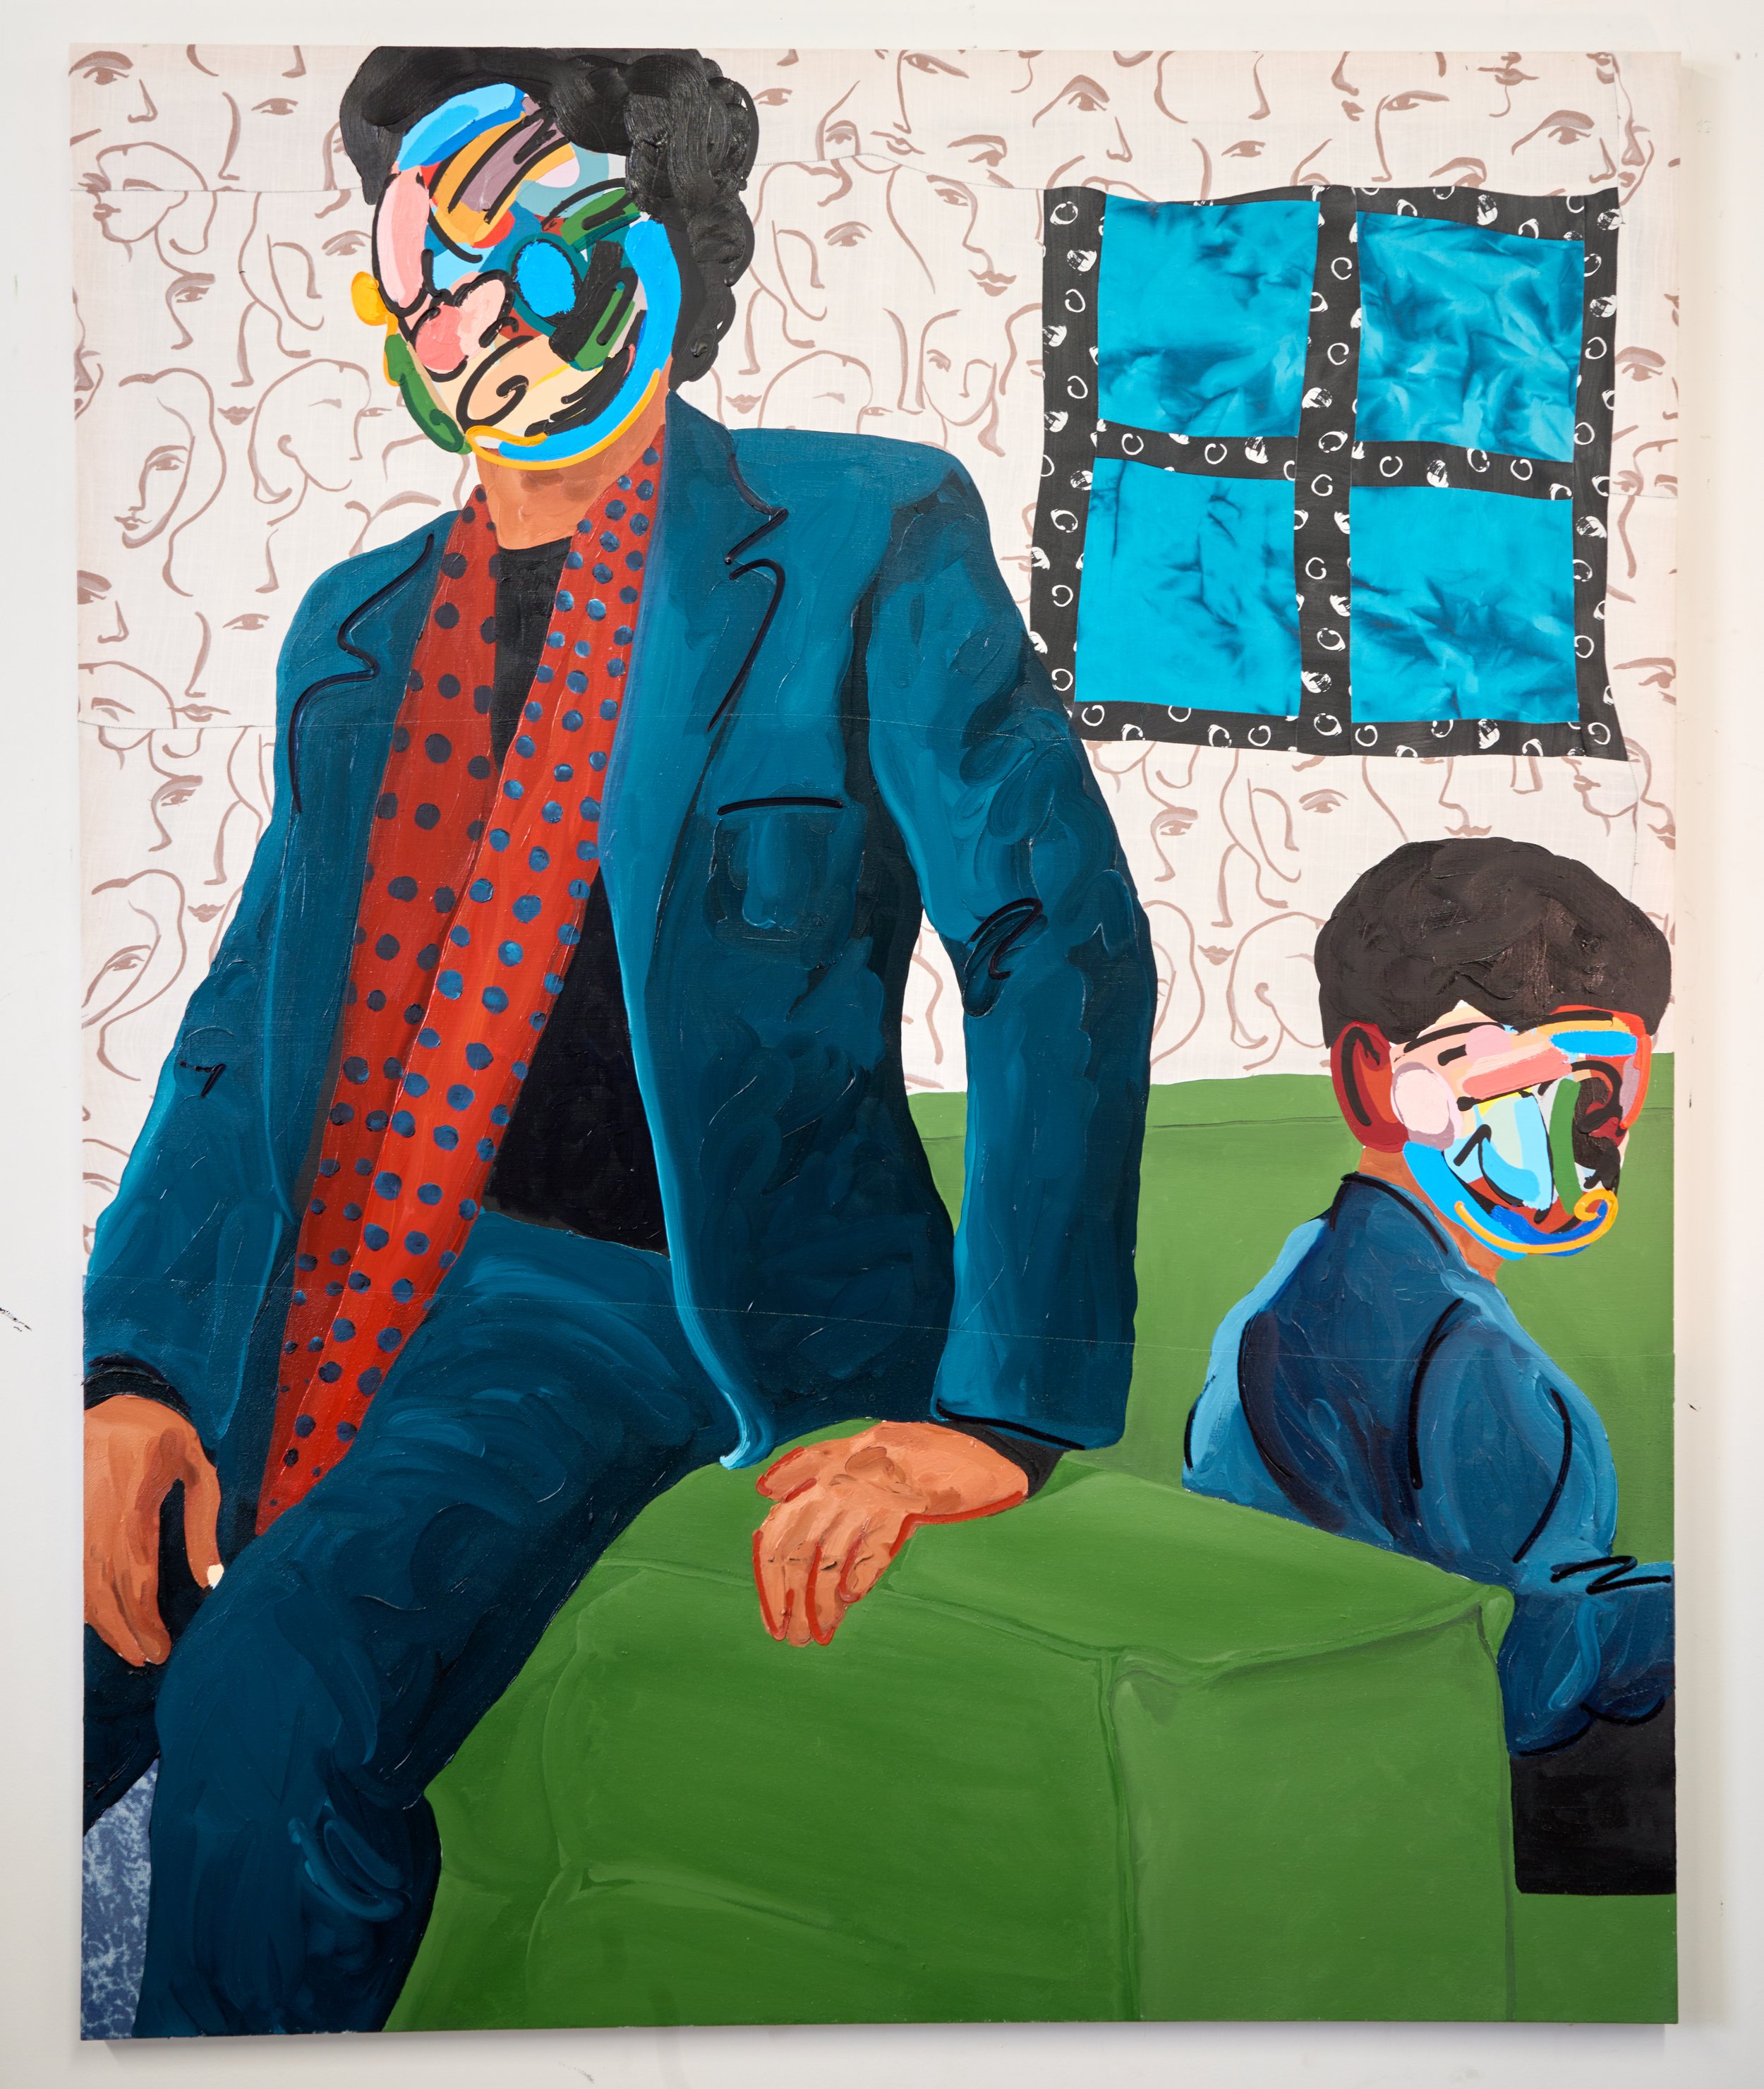  “Us and Elvis Guy Went to the Radisson”  Oil, acrylic, alkyd and flashe on sewn textiles  68” x 55” 